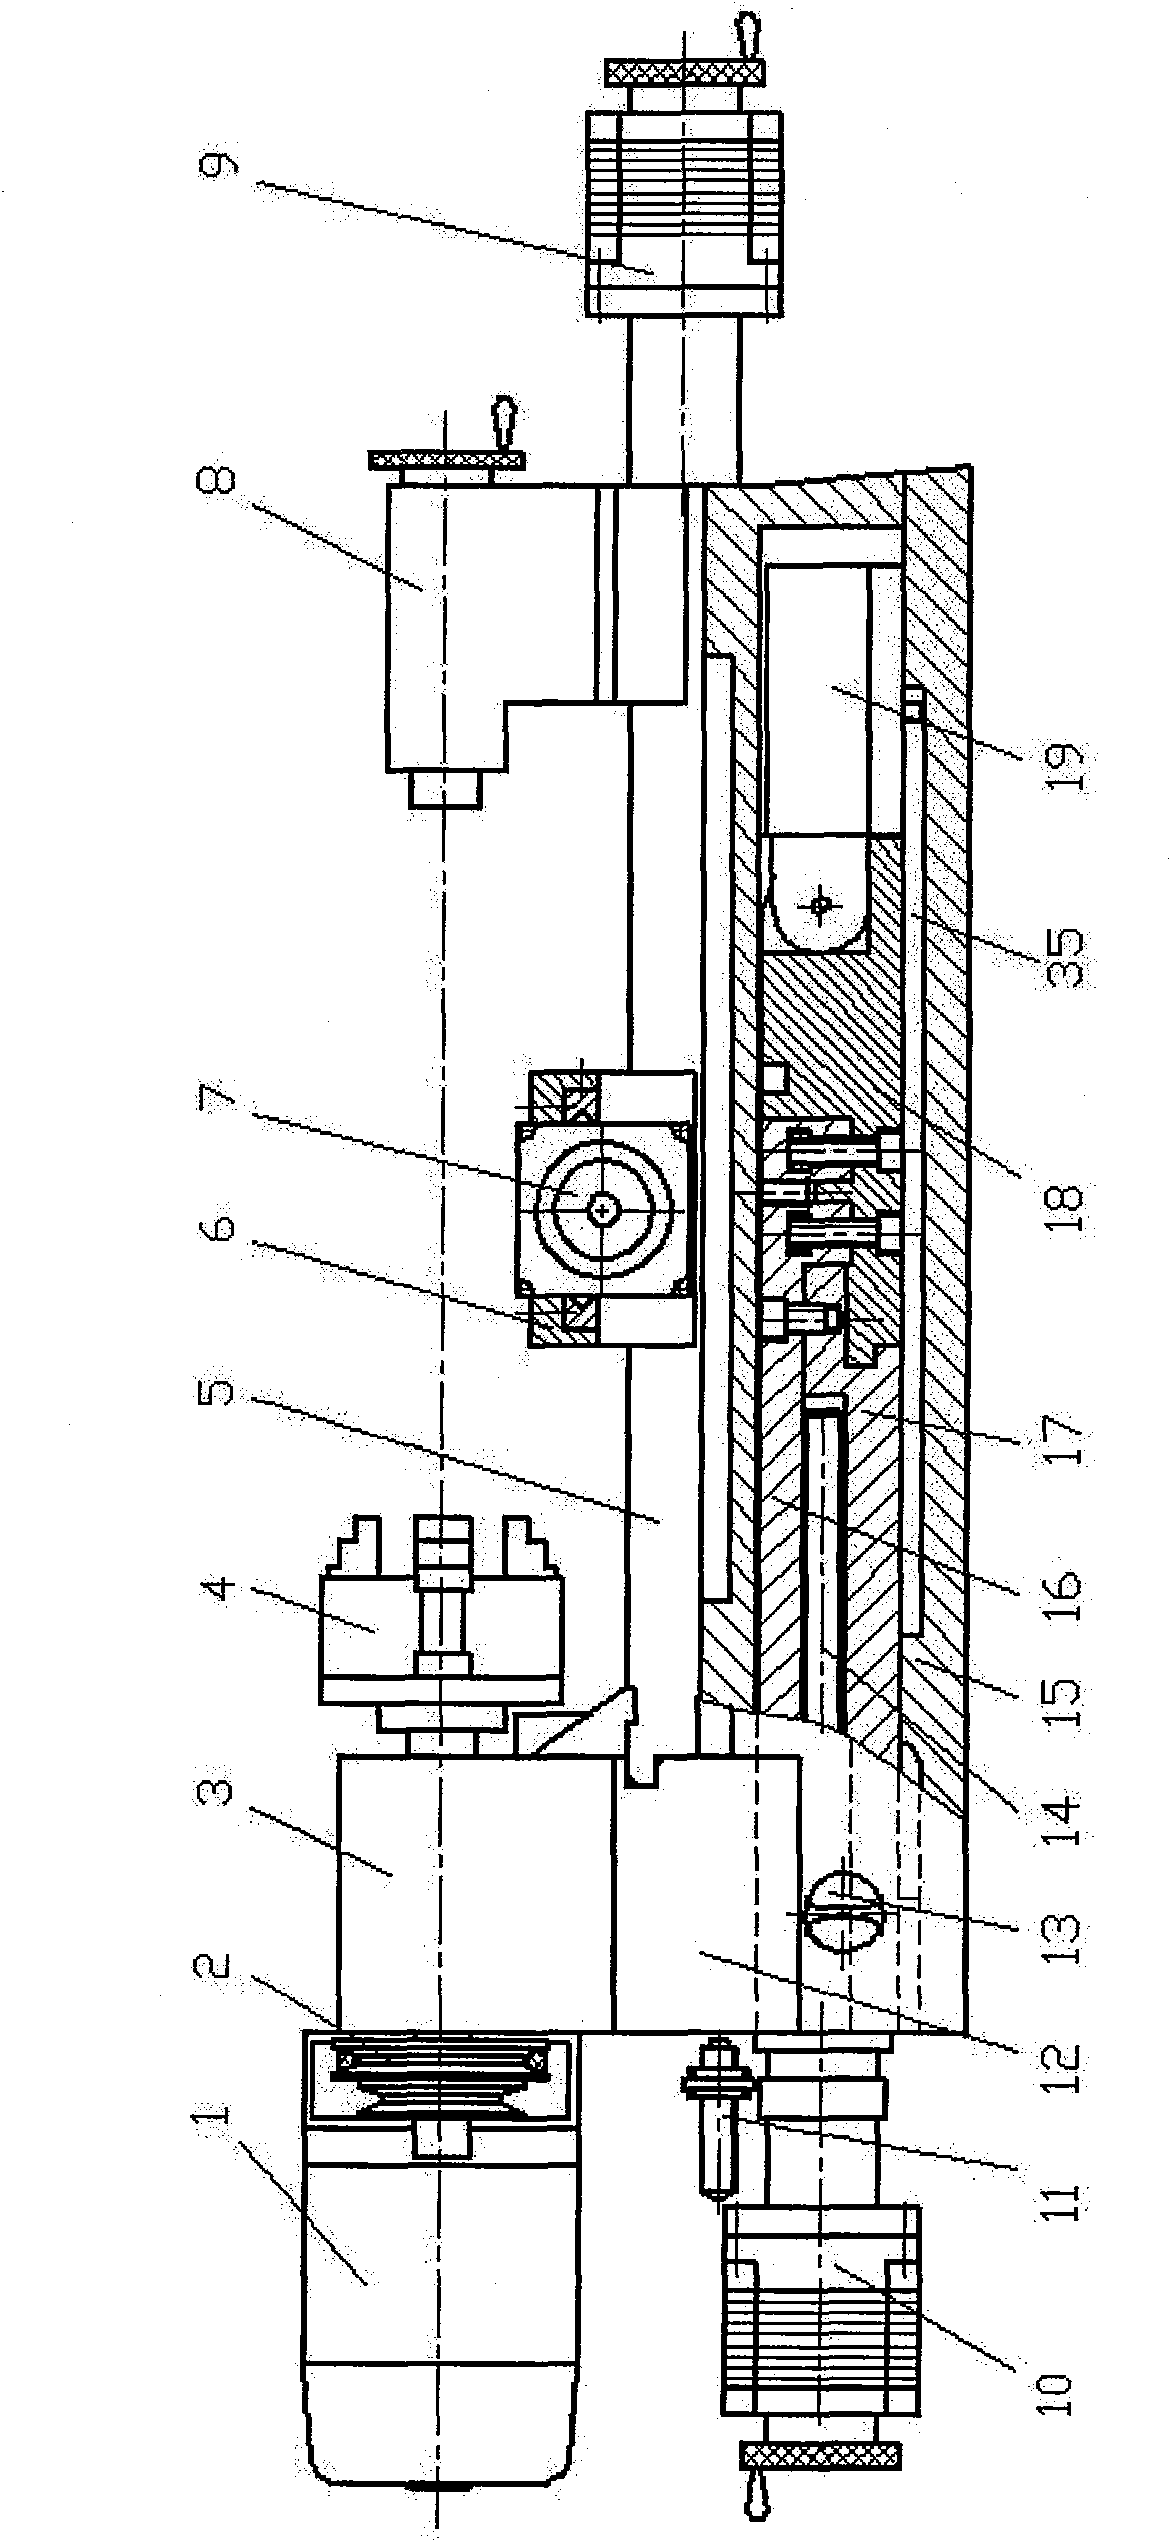 Changeable minisize multifunctional numerically-controlled machine tool